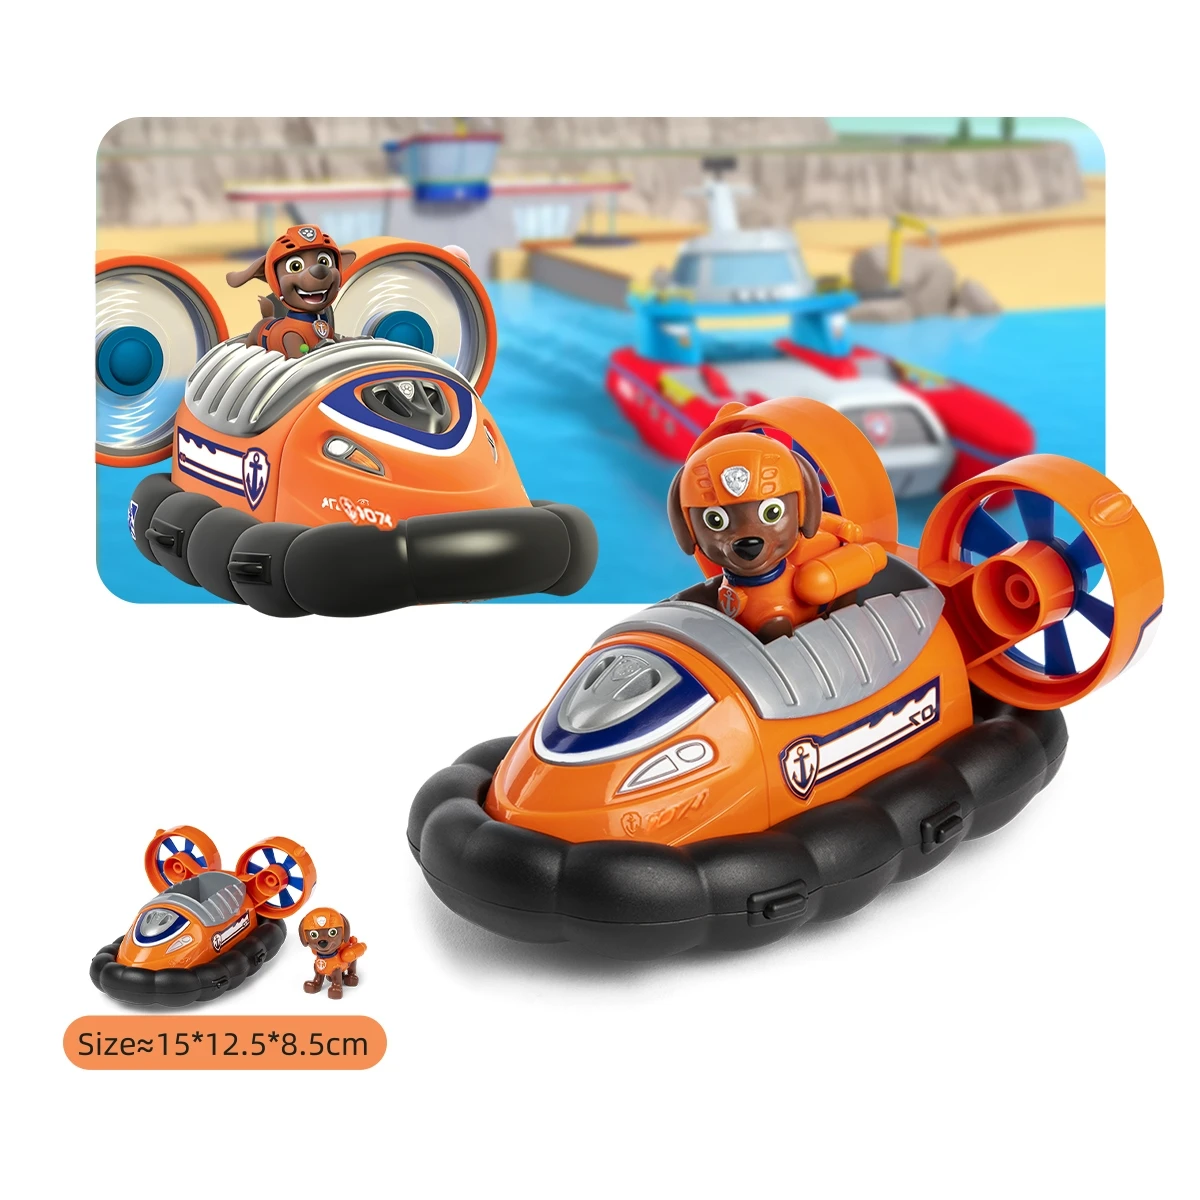 

PAW Patrol, Zuma’s Hovercraft Vehicle With Collectible Figure, For Kids Aged 3 And Up